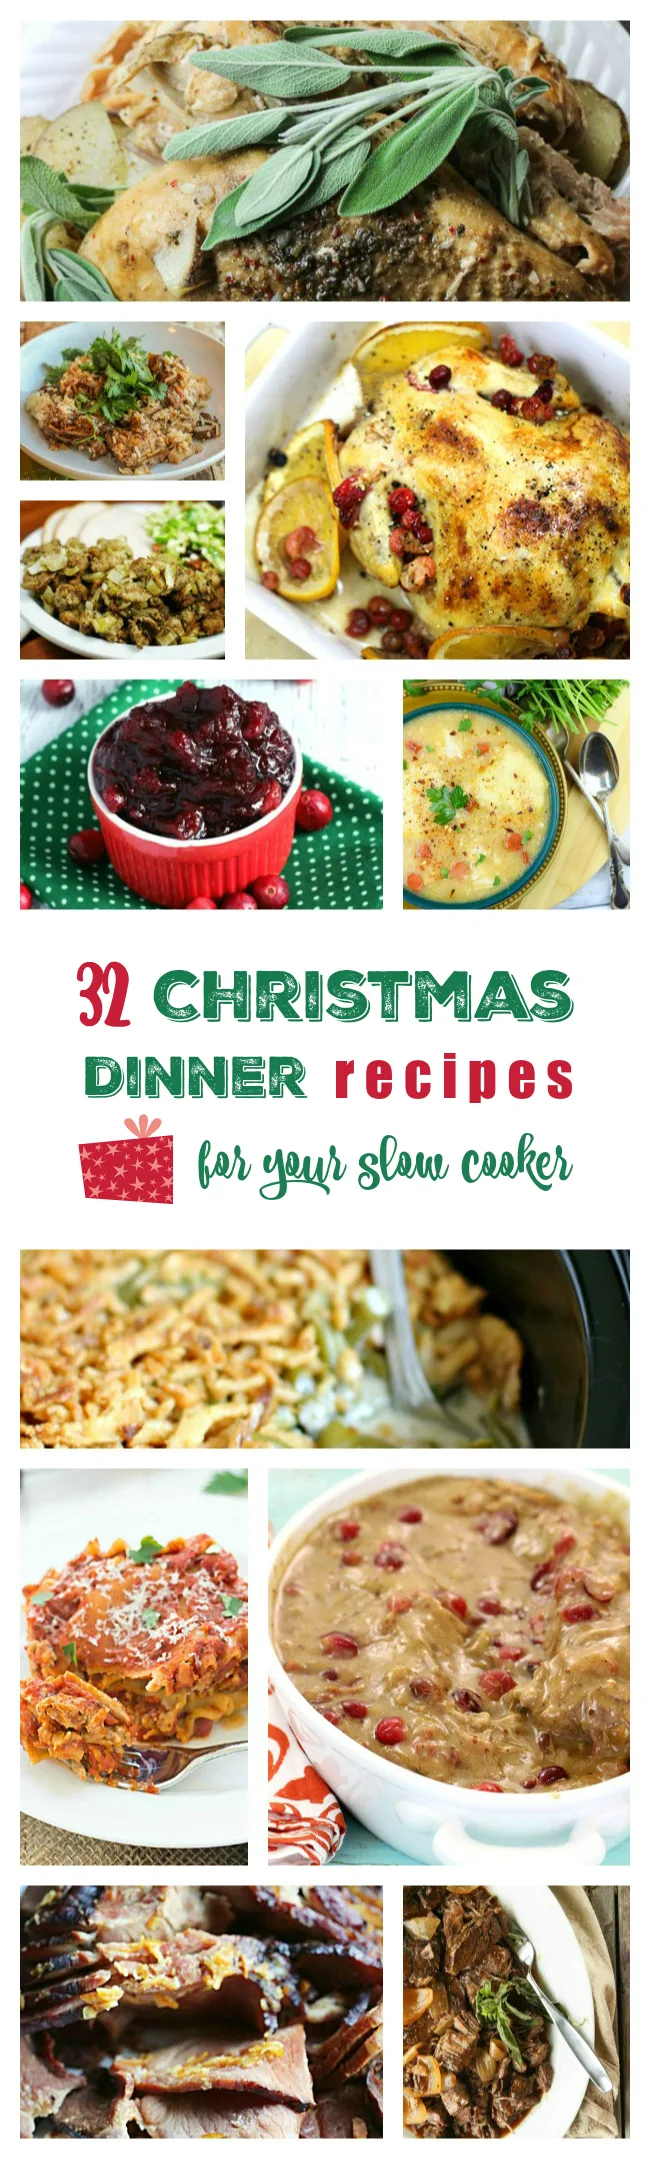 Yummers. Christmas Dinner recipes for the Crock Pot! Spend more time with friends and family and less time fussing over the oven.